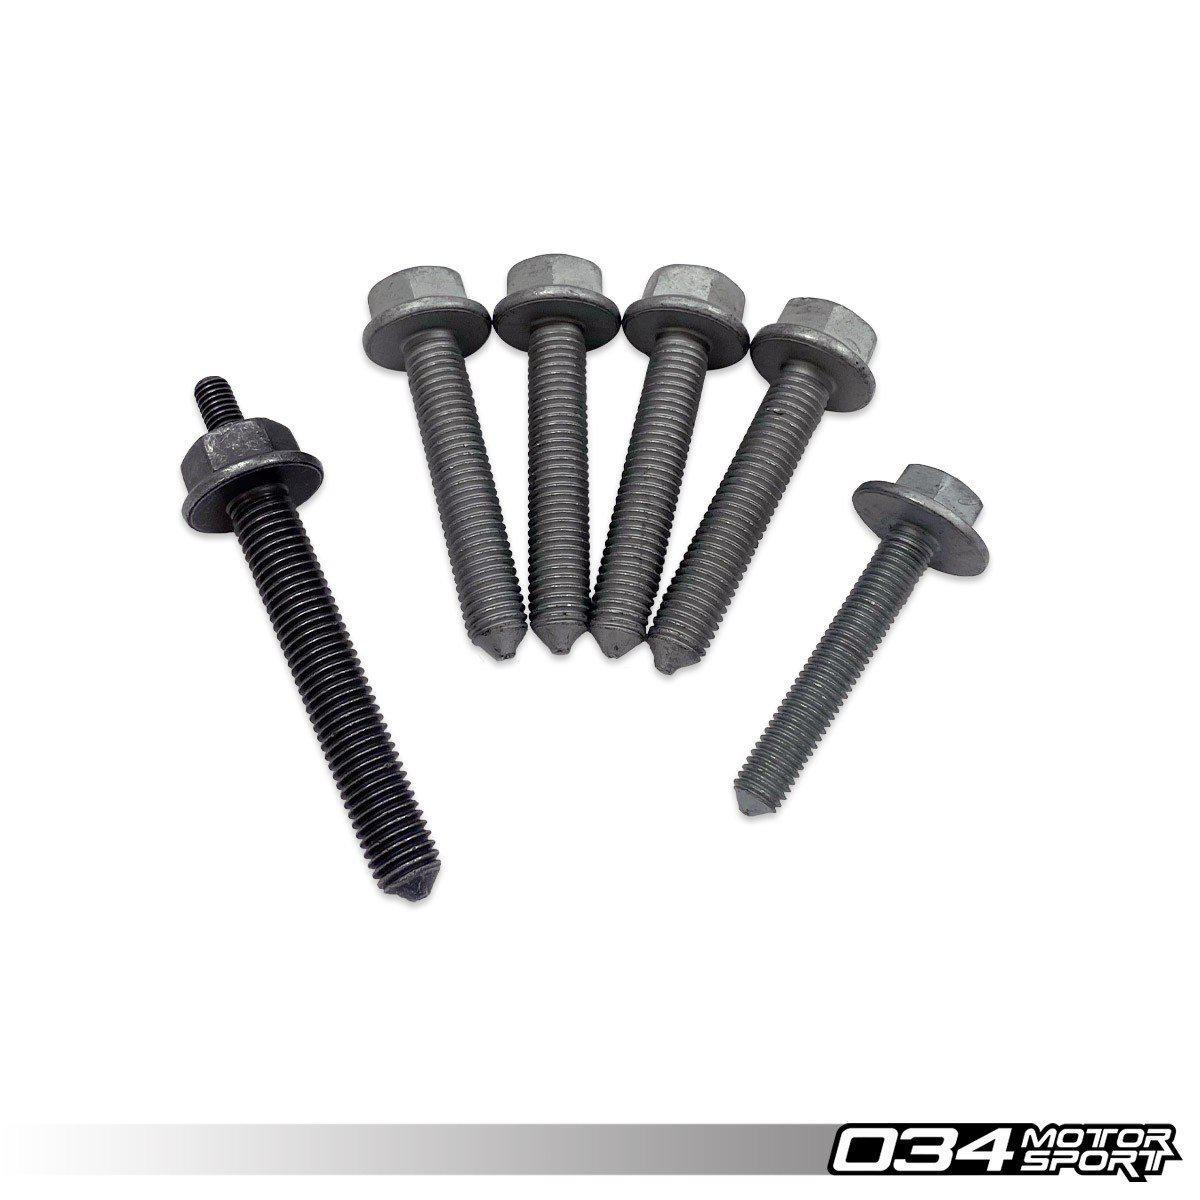 034Motorsport Motor Mount Only Hardware Kit For Audi 8S TTRS And 8V.5 RS3-A Little Tuning Co